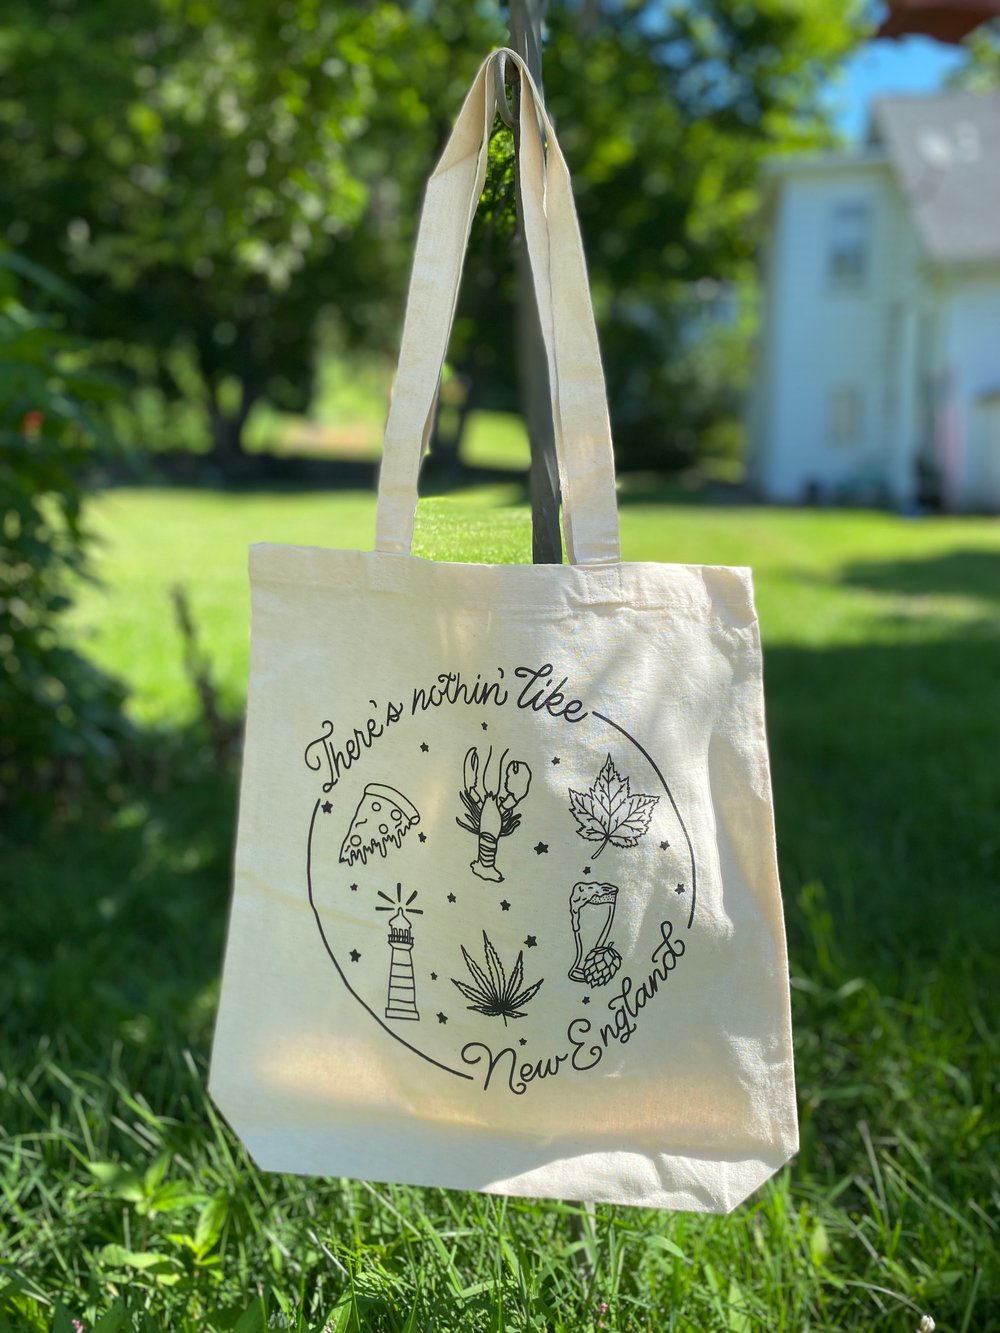 There's nothin' like New England tote bag